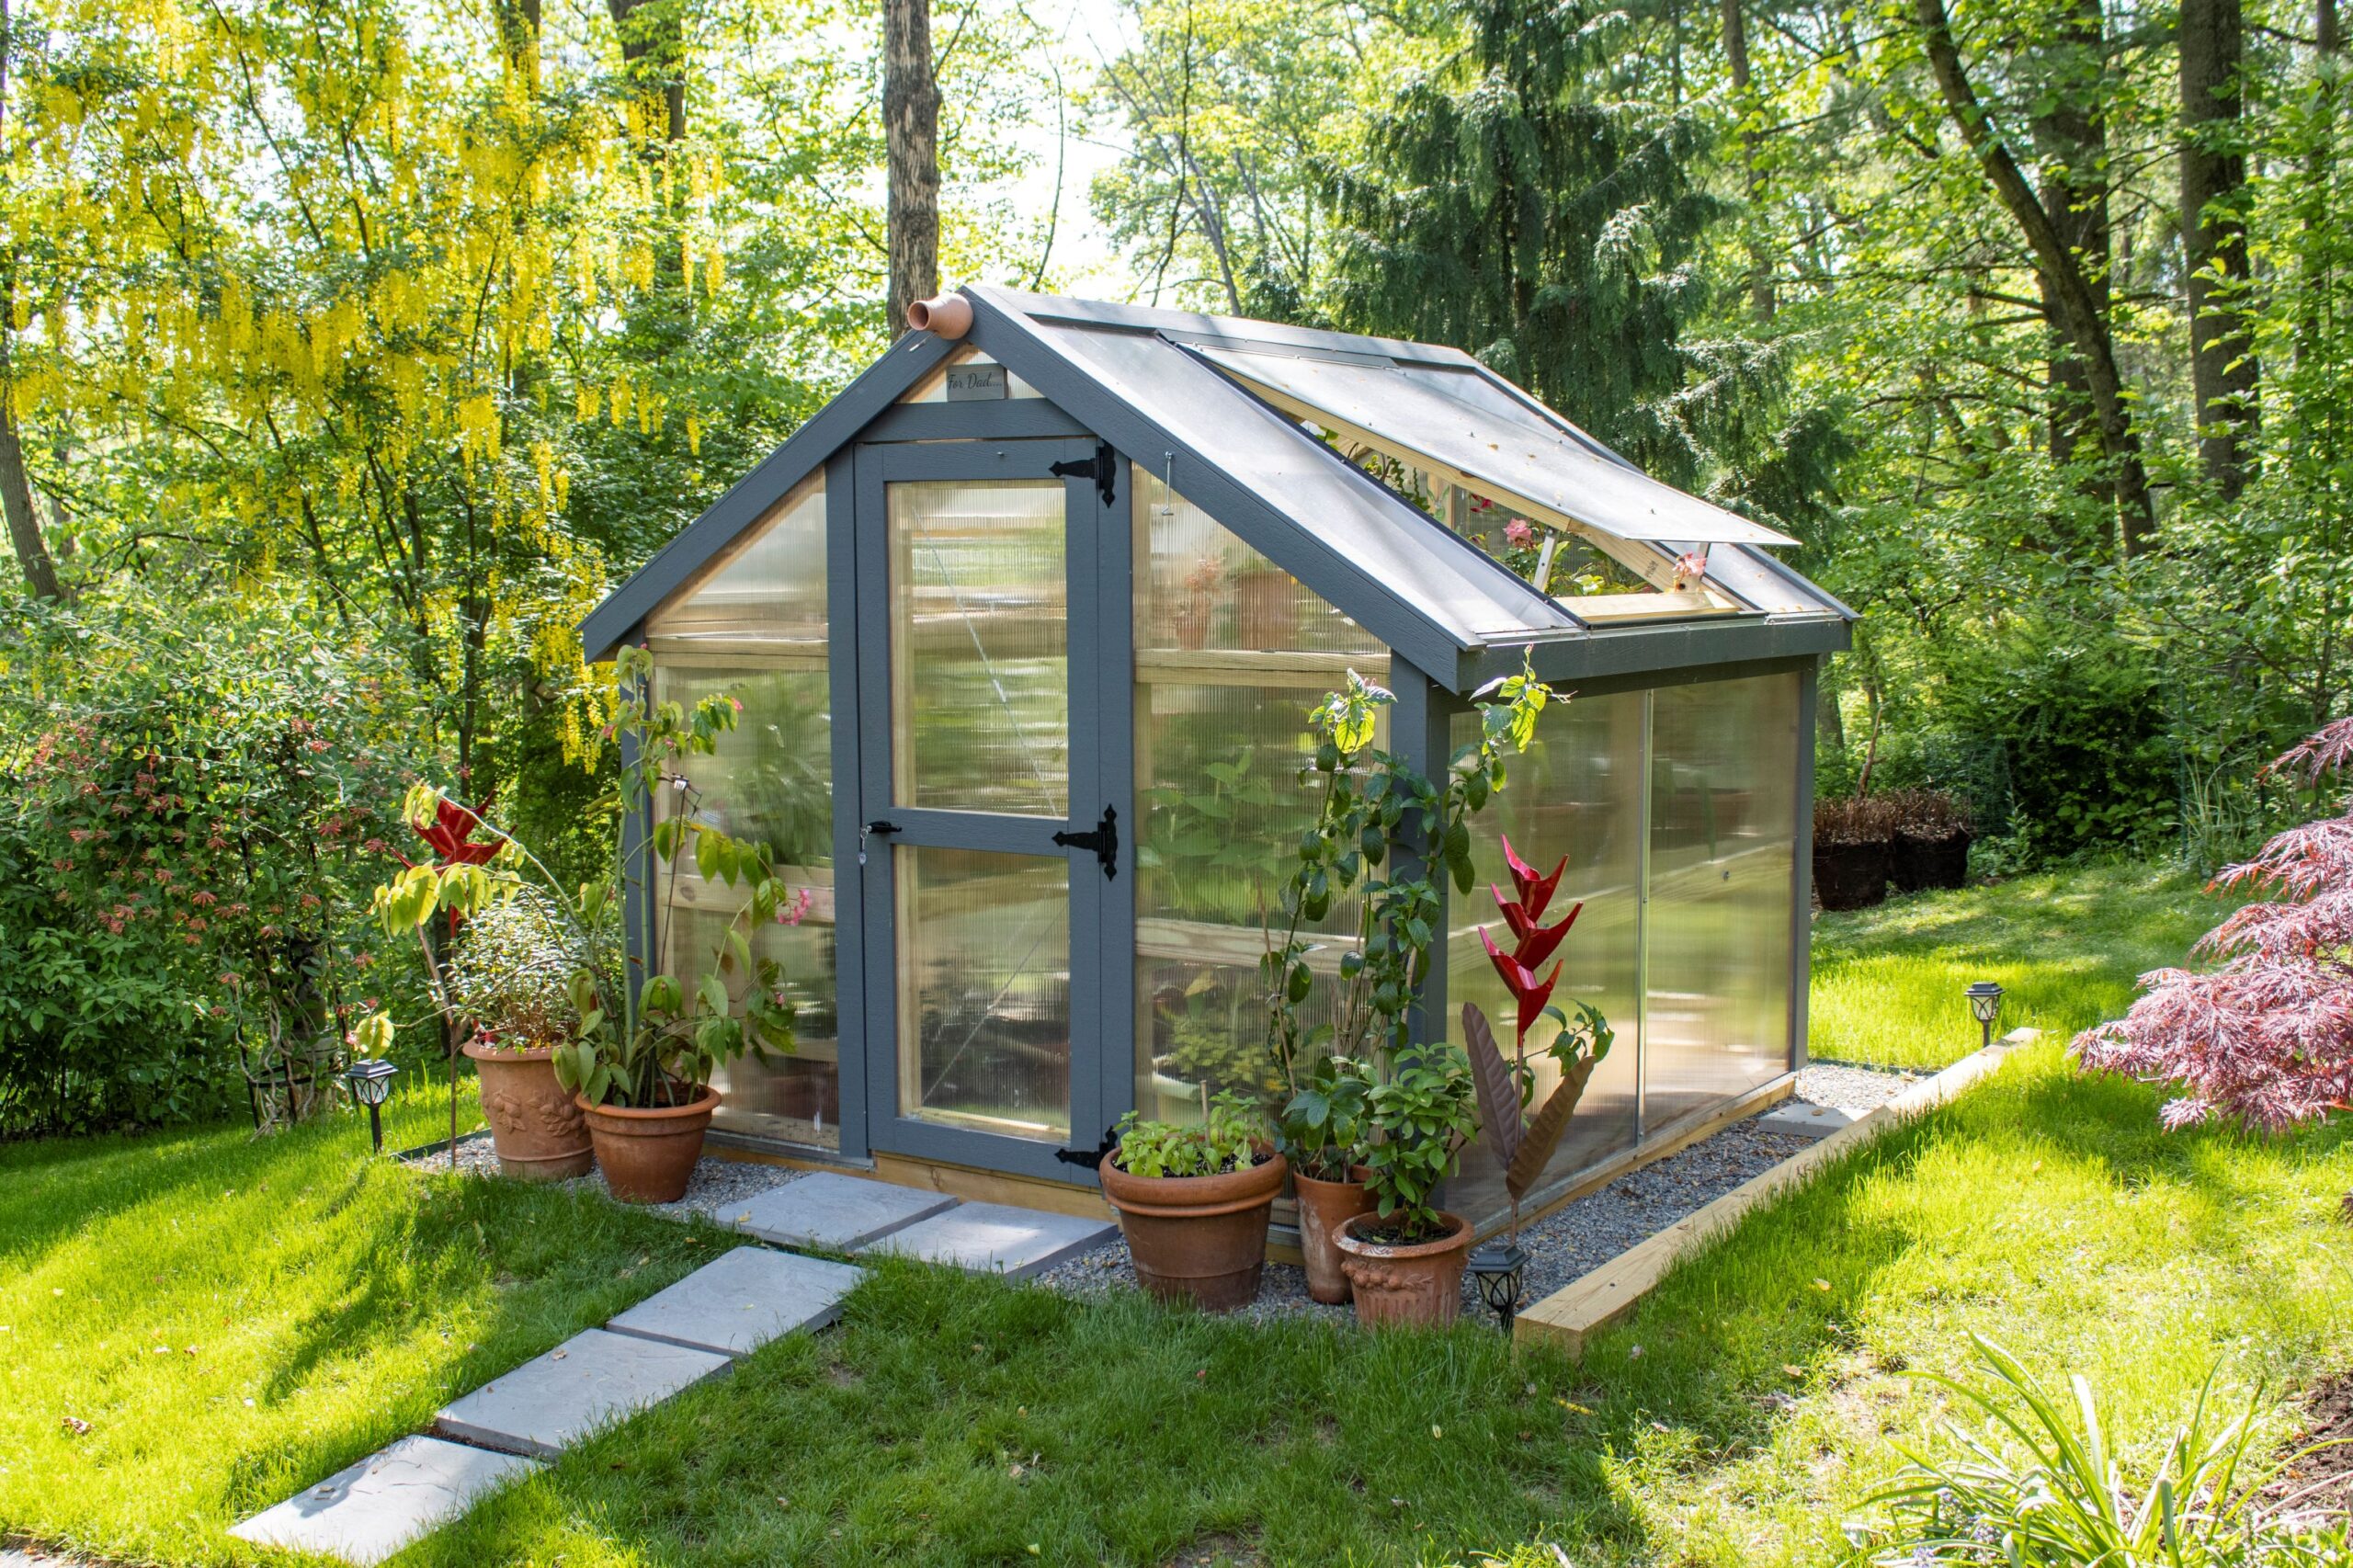 Right side view of a gray A-Frame Greenhouse with stone pathway and potted plants by the door